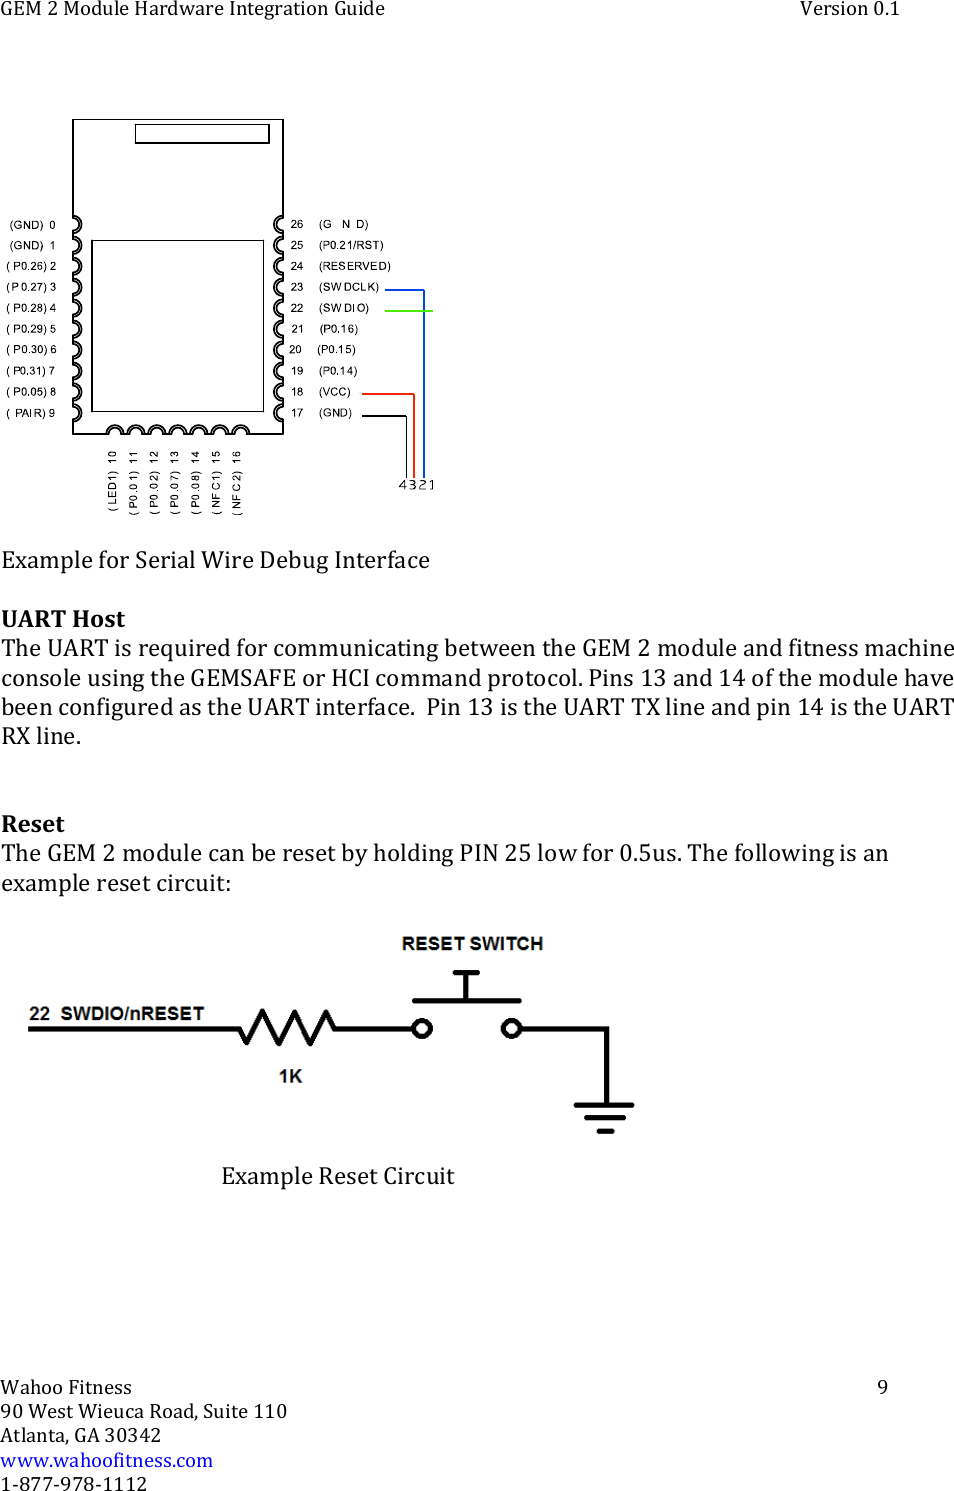 GEM 2 Module Hardware Integration Guide Version 0.1Wahoo Fitness 990 West Wieuca Road, Suite 110Atlanta, GA 30342www.wahoofitness.com1‐877‐978‐1112Example for Serial Wire Debug InterfaceUART HostTheUARTisrequiredforcommunicatingbetween the GEM 2 module and fitness machineconsole using the GEMSAFE or HCI command protocol. Pins 13 and 14 of the module havebeen configured as the UART interface. Pin 13 is the UART TX line and pin 14 is the UARTRX line.ResetThe GEM 2 module can be reset by holding PIN 25 low for 0.5us. The following is anexample reset circuit:Example Reset Circuit